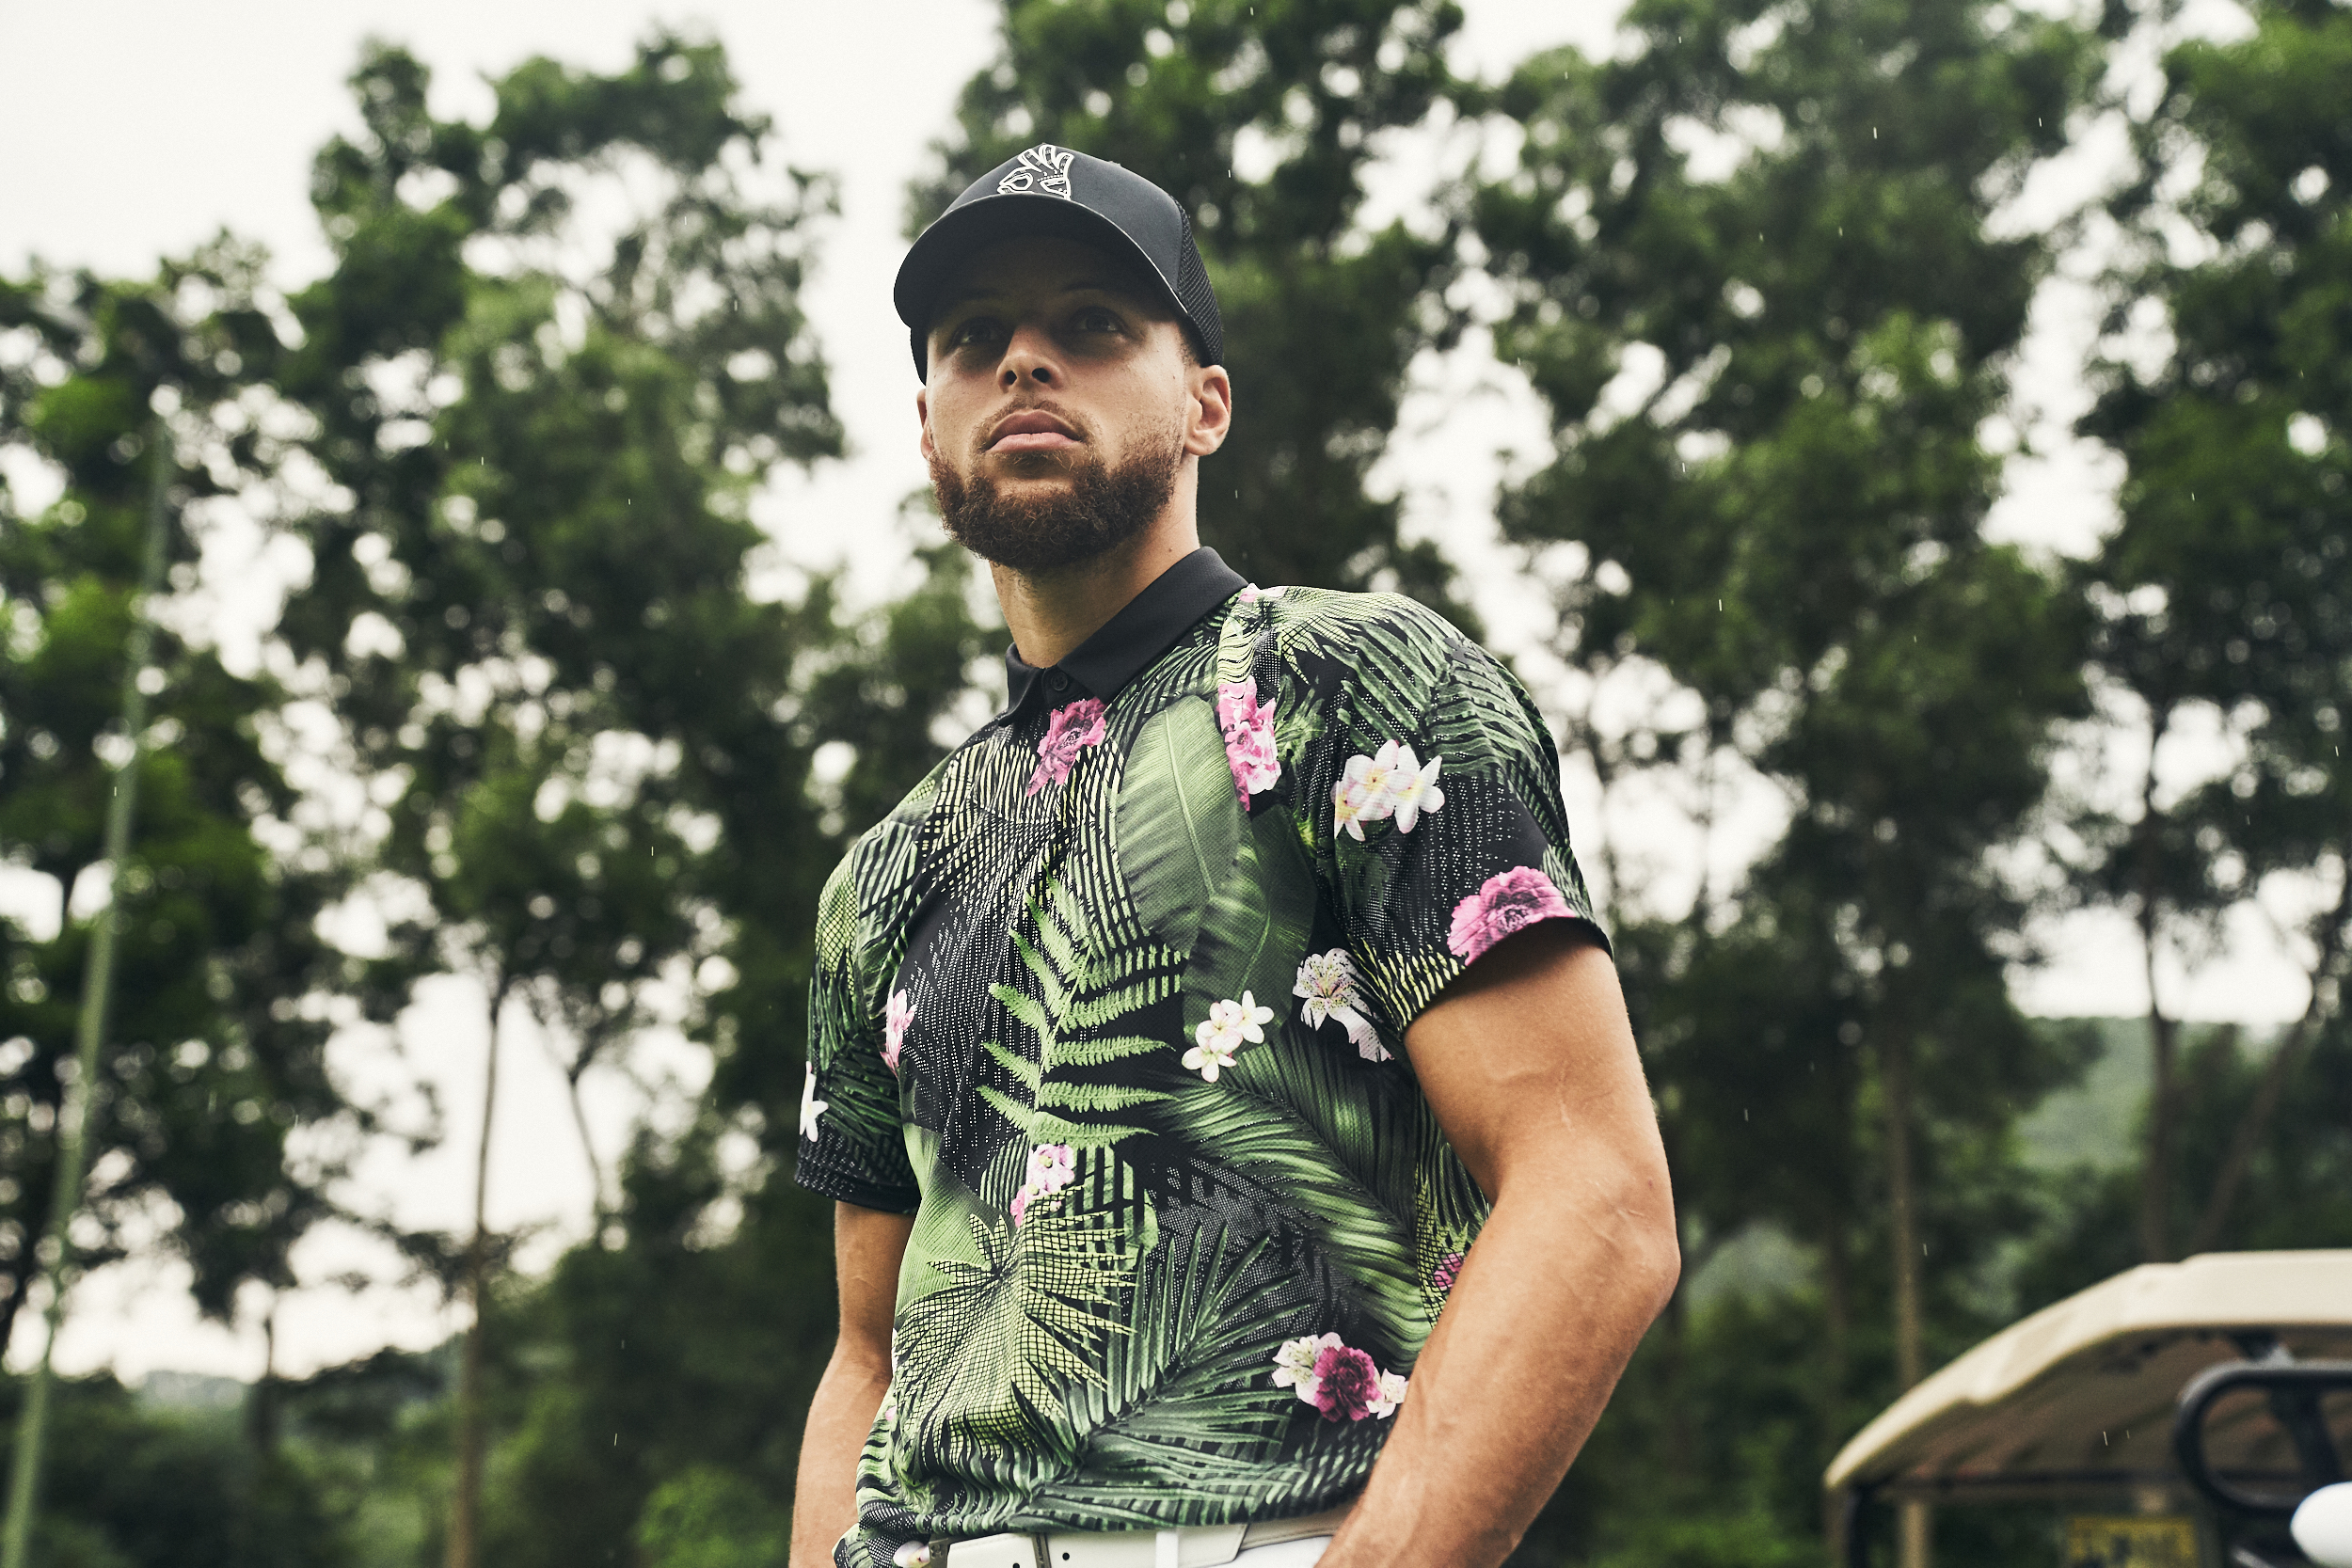 Steph Curry's new Under Armour golf collection is now available, This is  the Loop